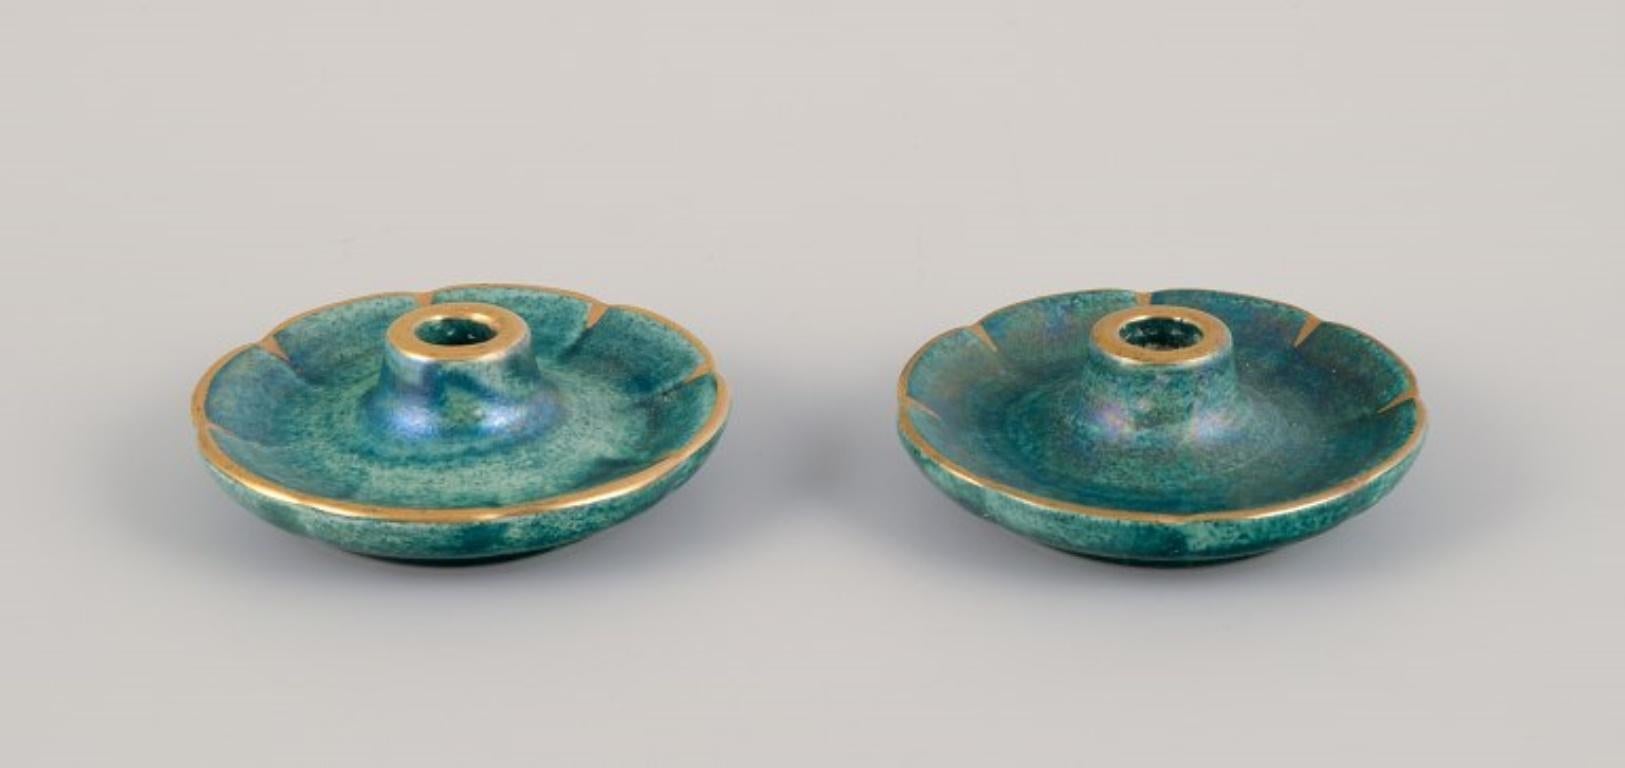 Josef Ekberg (1877-1945) for Gustavsberg, Sweden. 
Three candle holders with glaze in green-blue tones, gold decoration.
Mid-20th century.
Marked.
In perfect condition.
Tall: Diameter 9.4 cm x Height 8.5 cm.
Short: Diameter 8.0 cm x Height 3.0 cm.